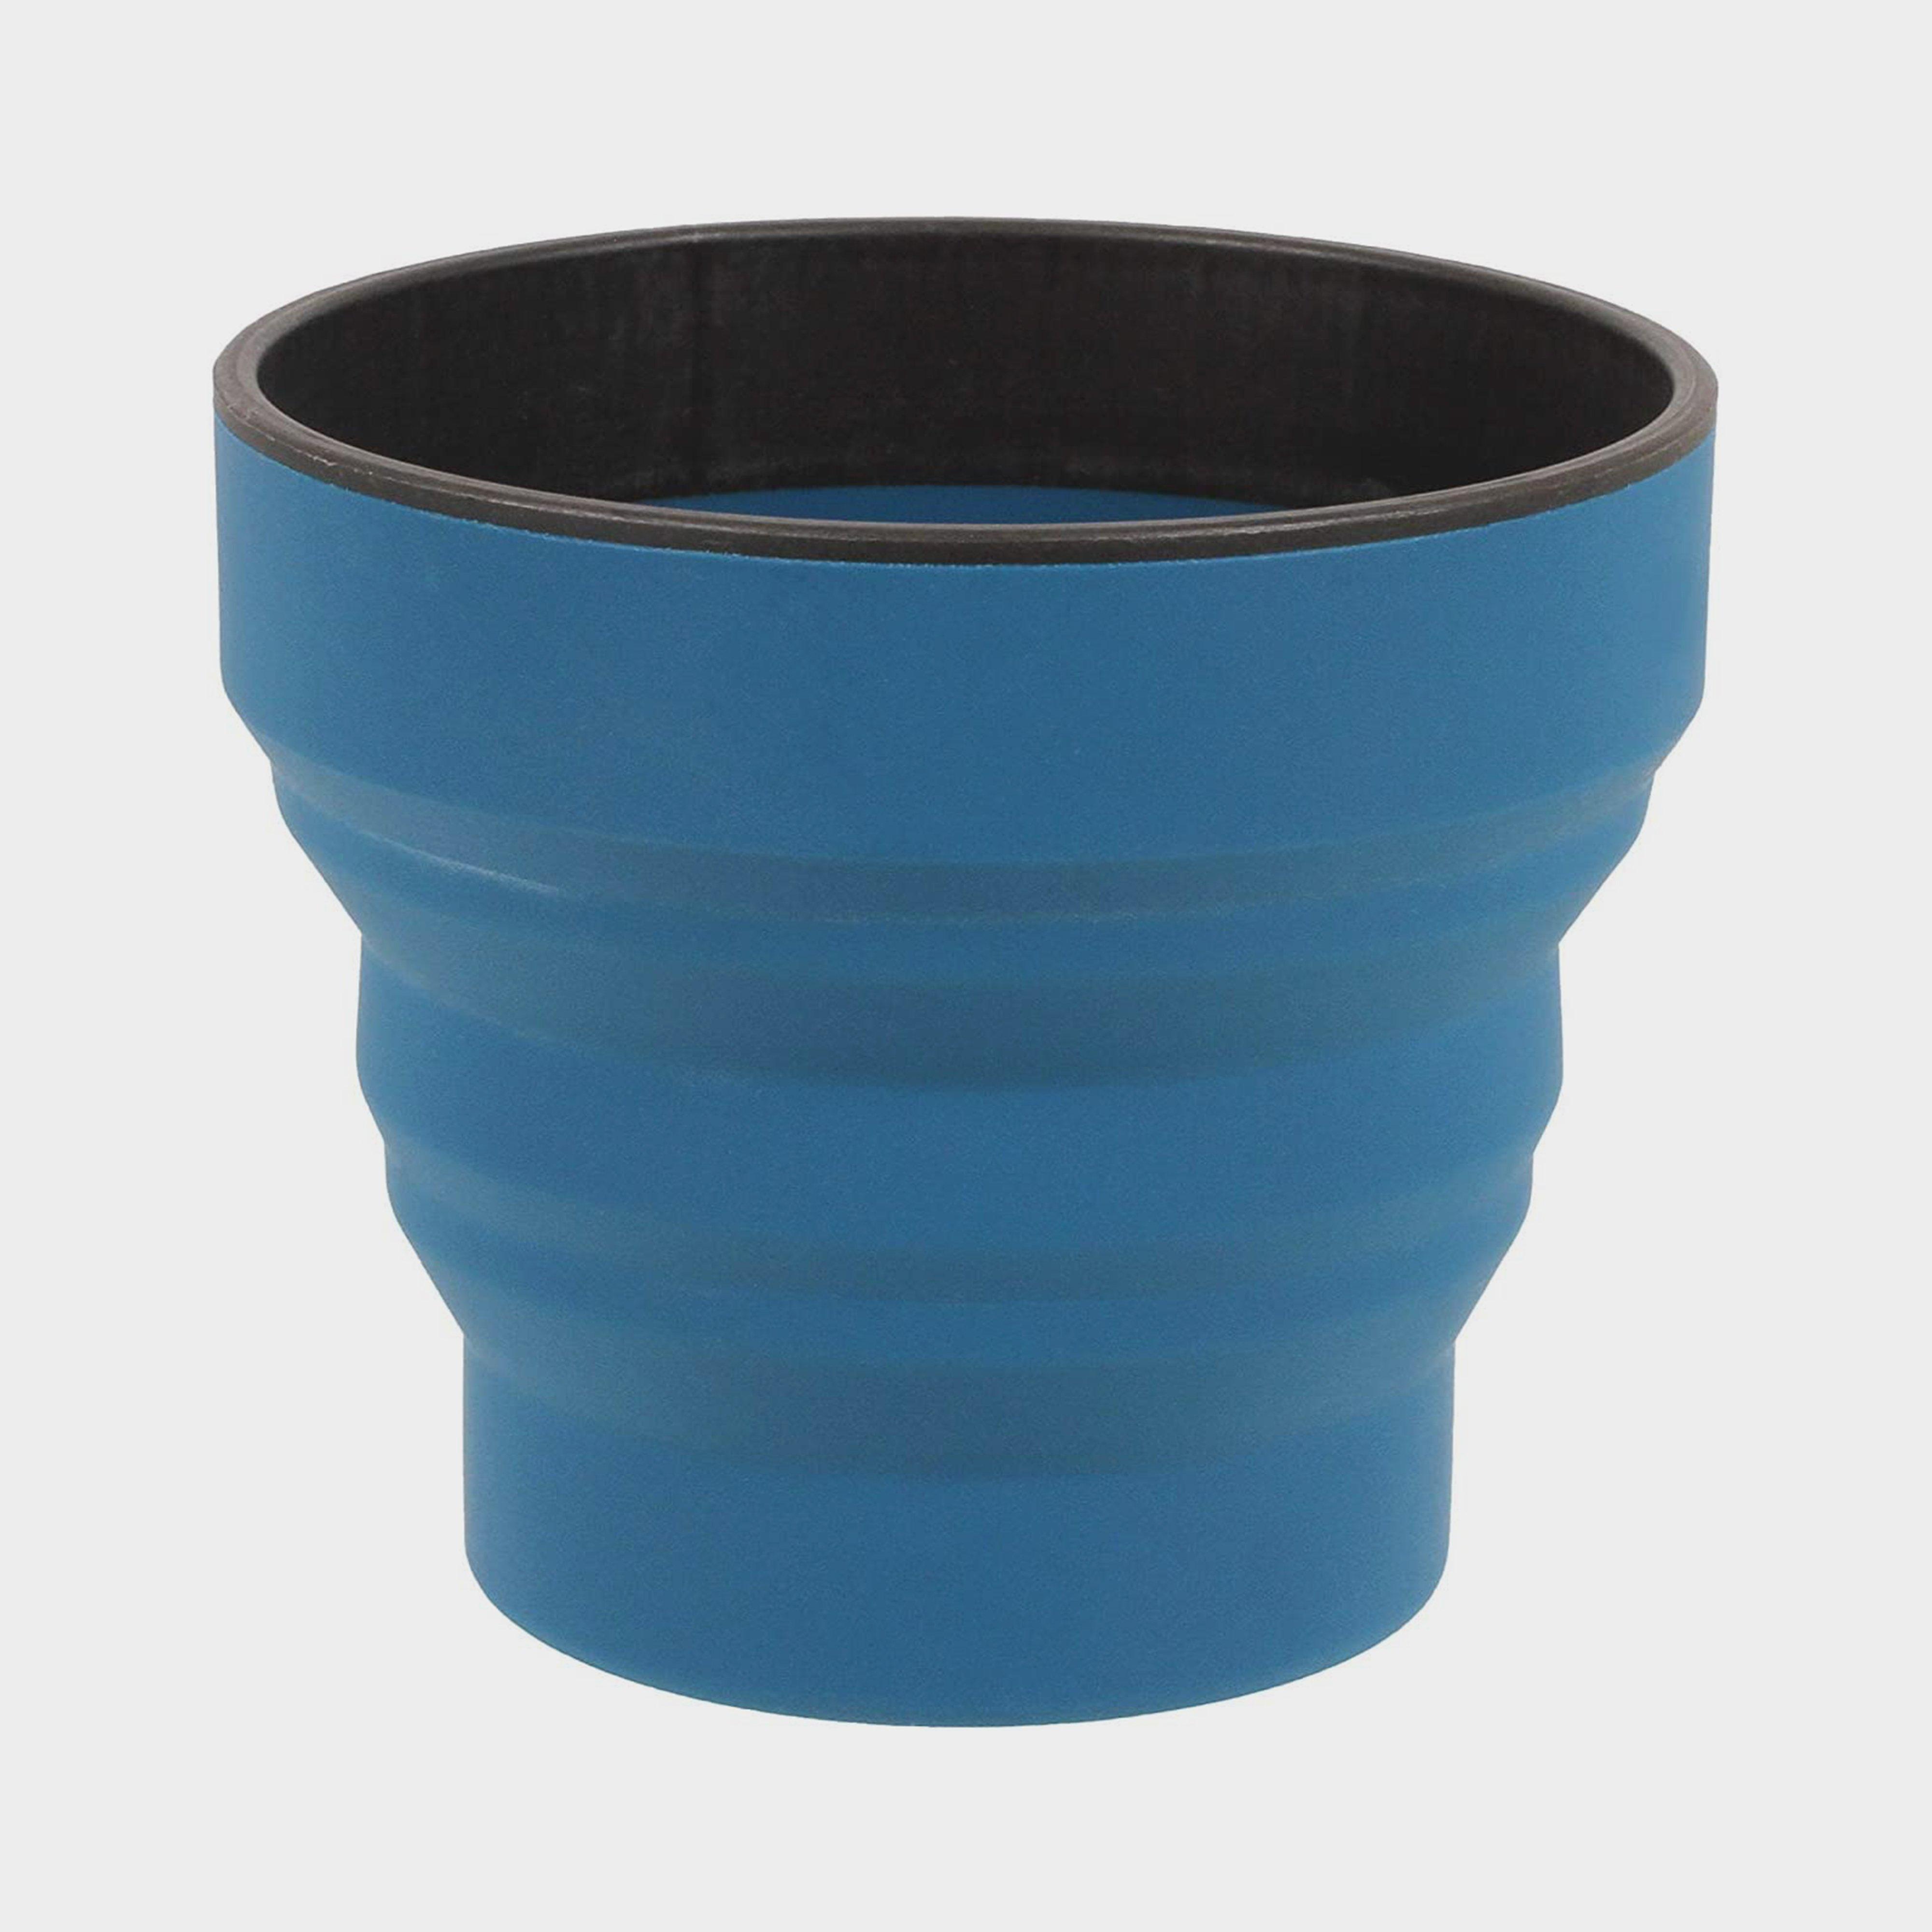 Ellipse Collapsible Cup - Navy, Navy